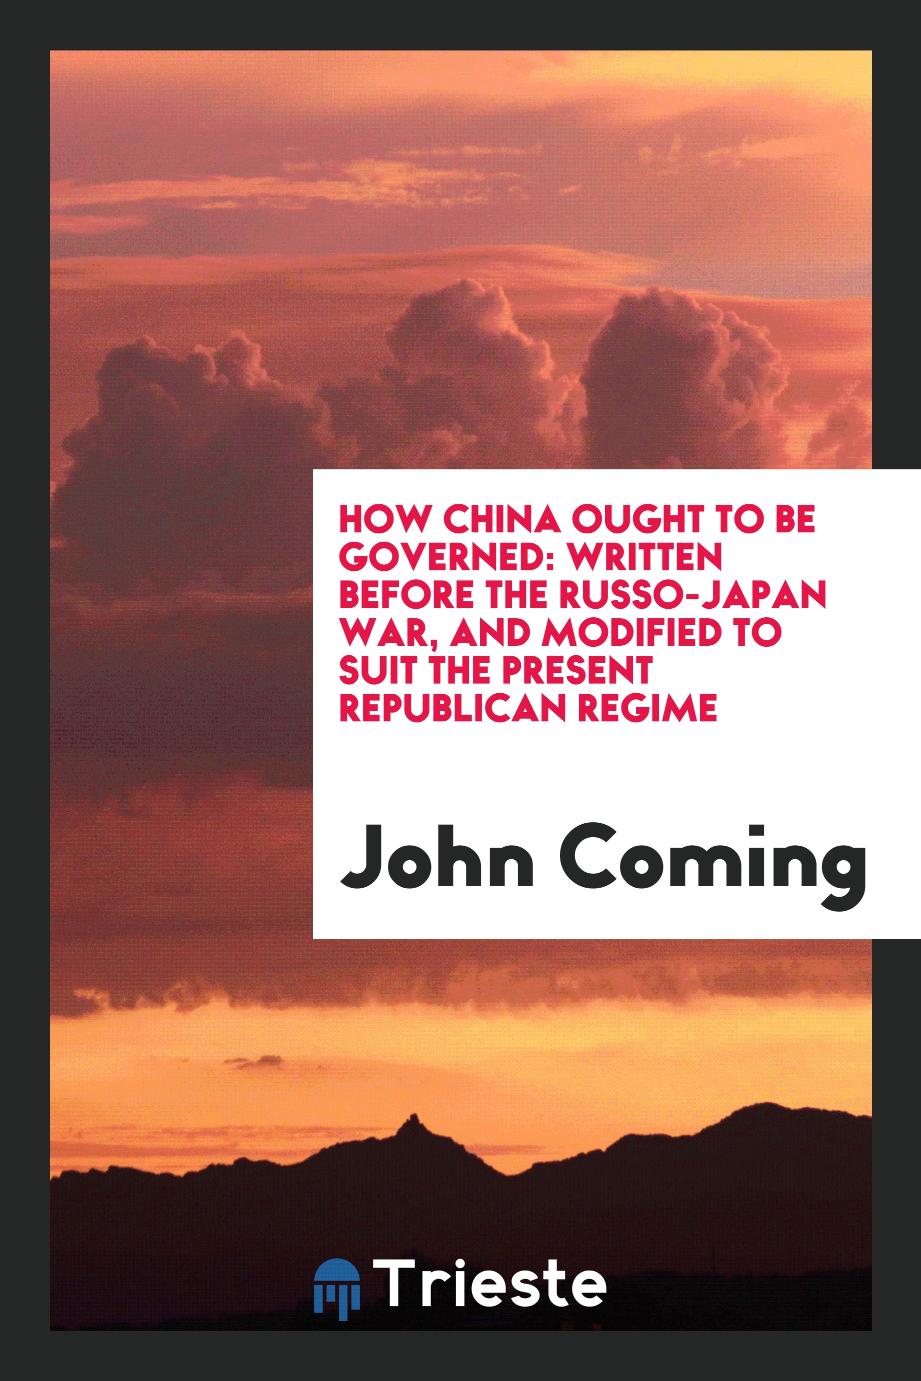 How China Ought to be Governed: Written Before the Russo-Japan War, and Modified to Suit the Present Republican Regime